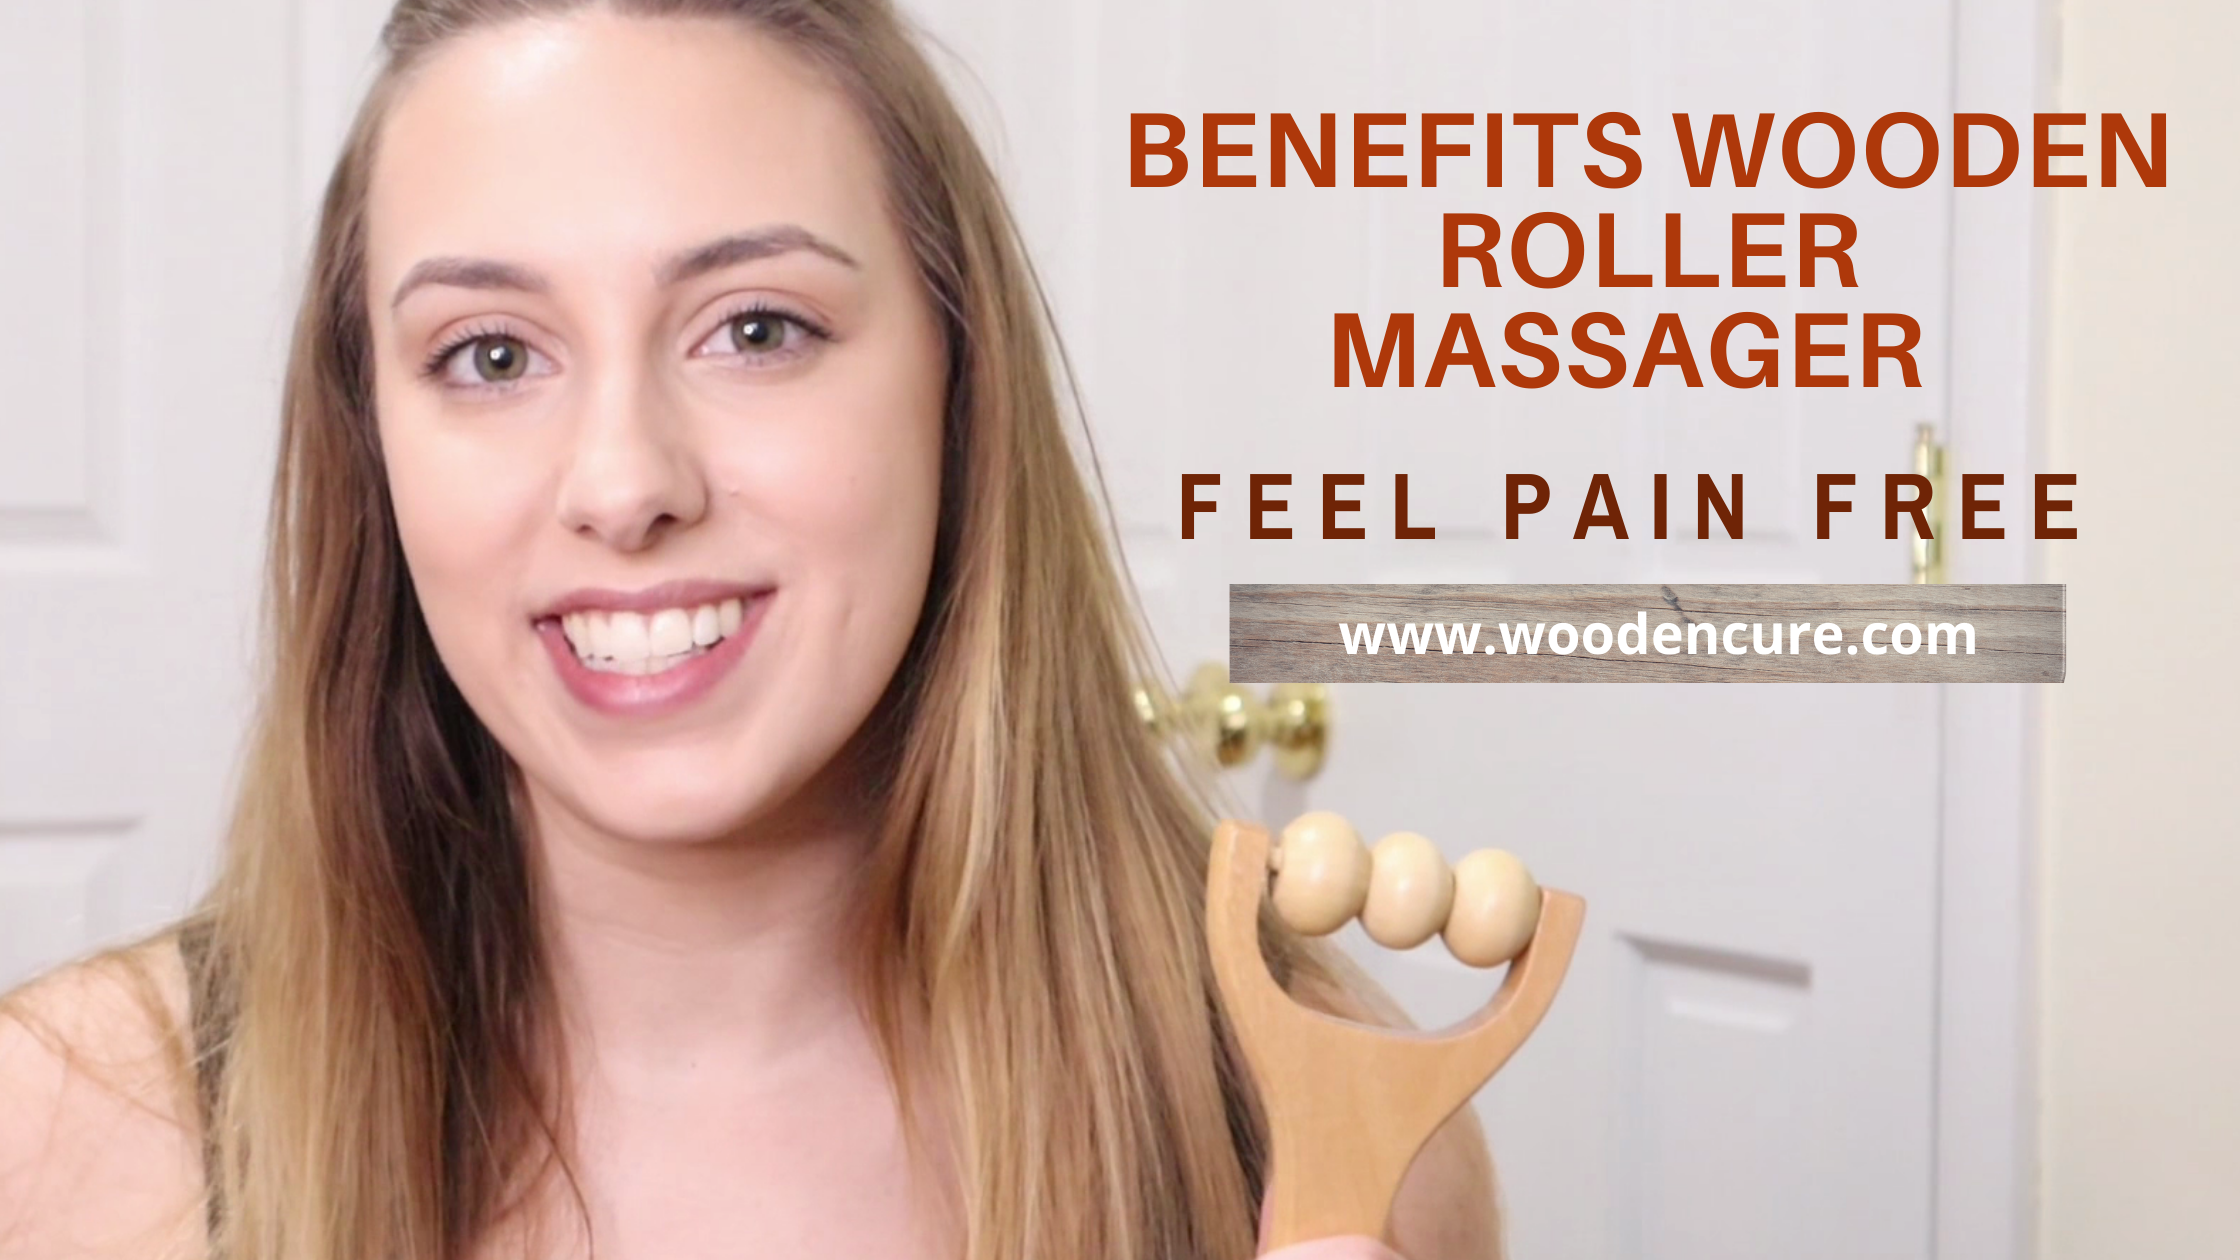 The Benefits of a Wooden Body Massage Roller